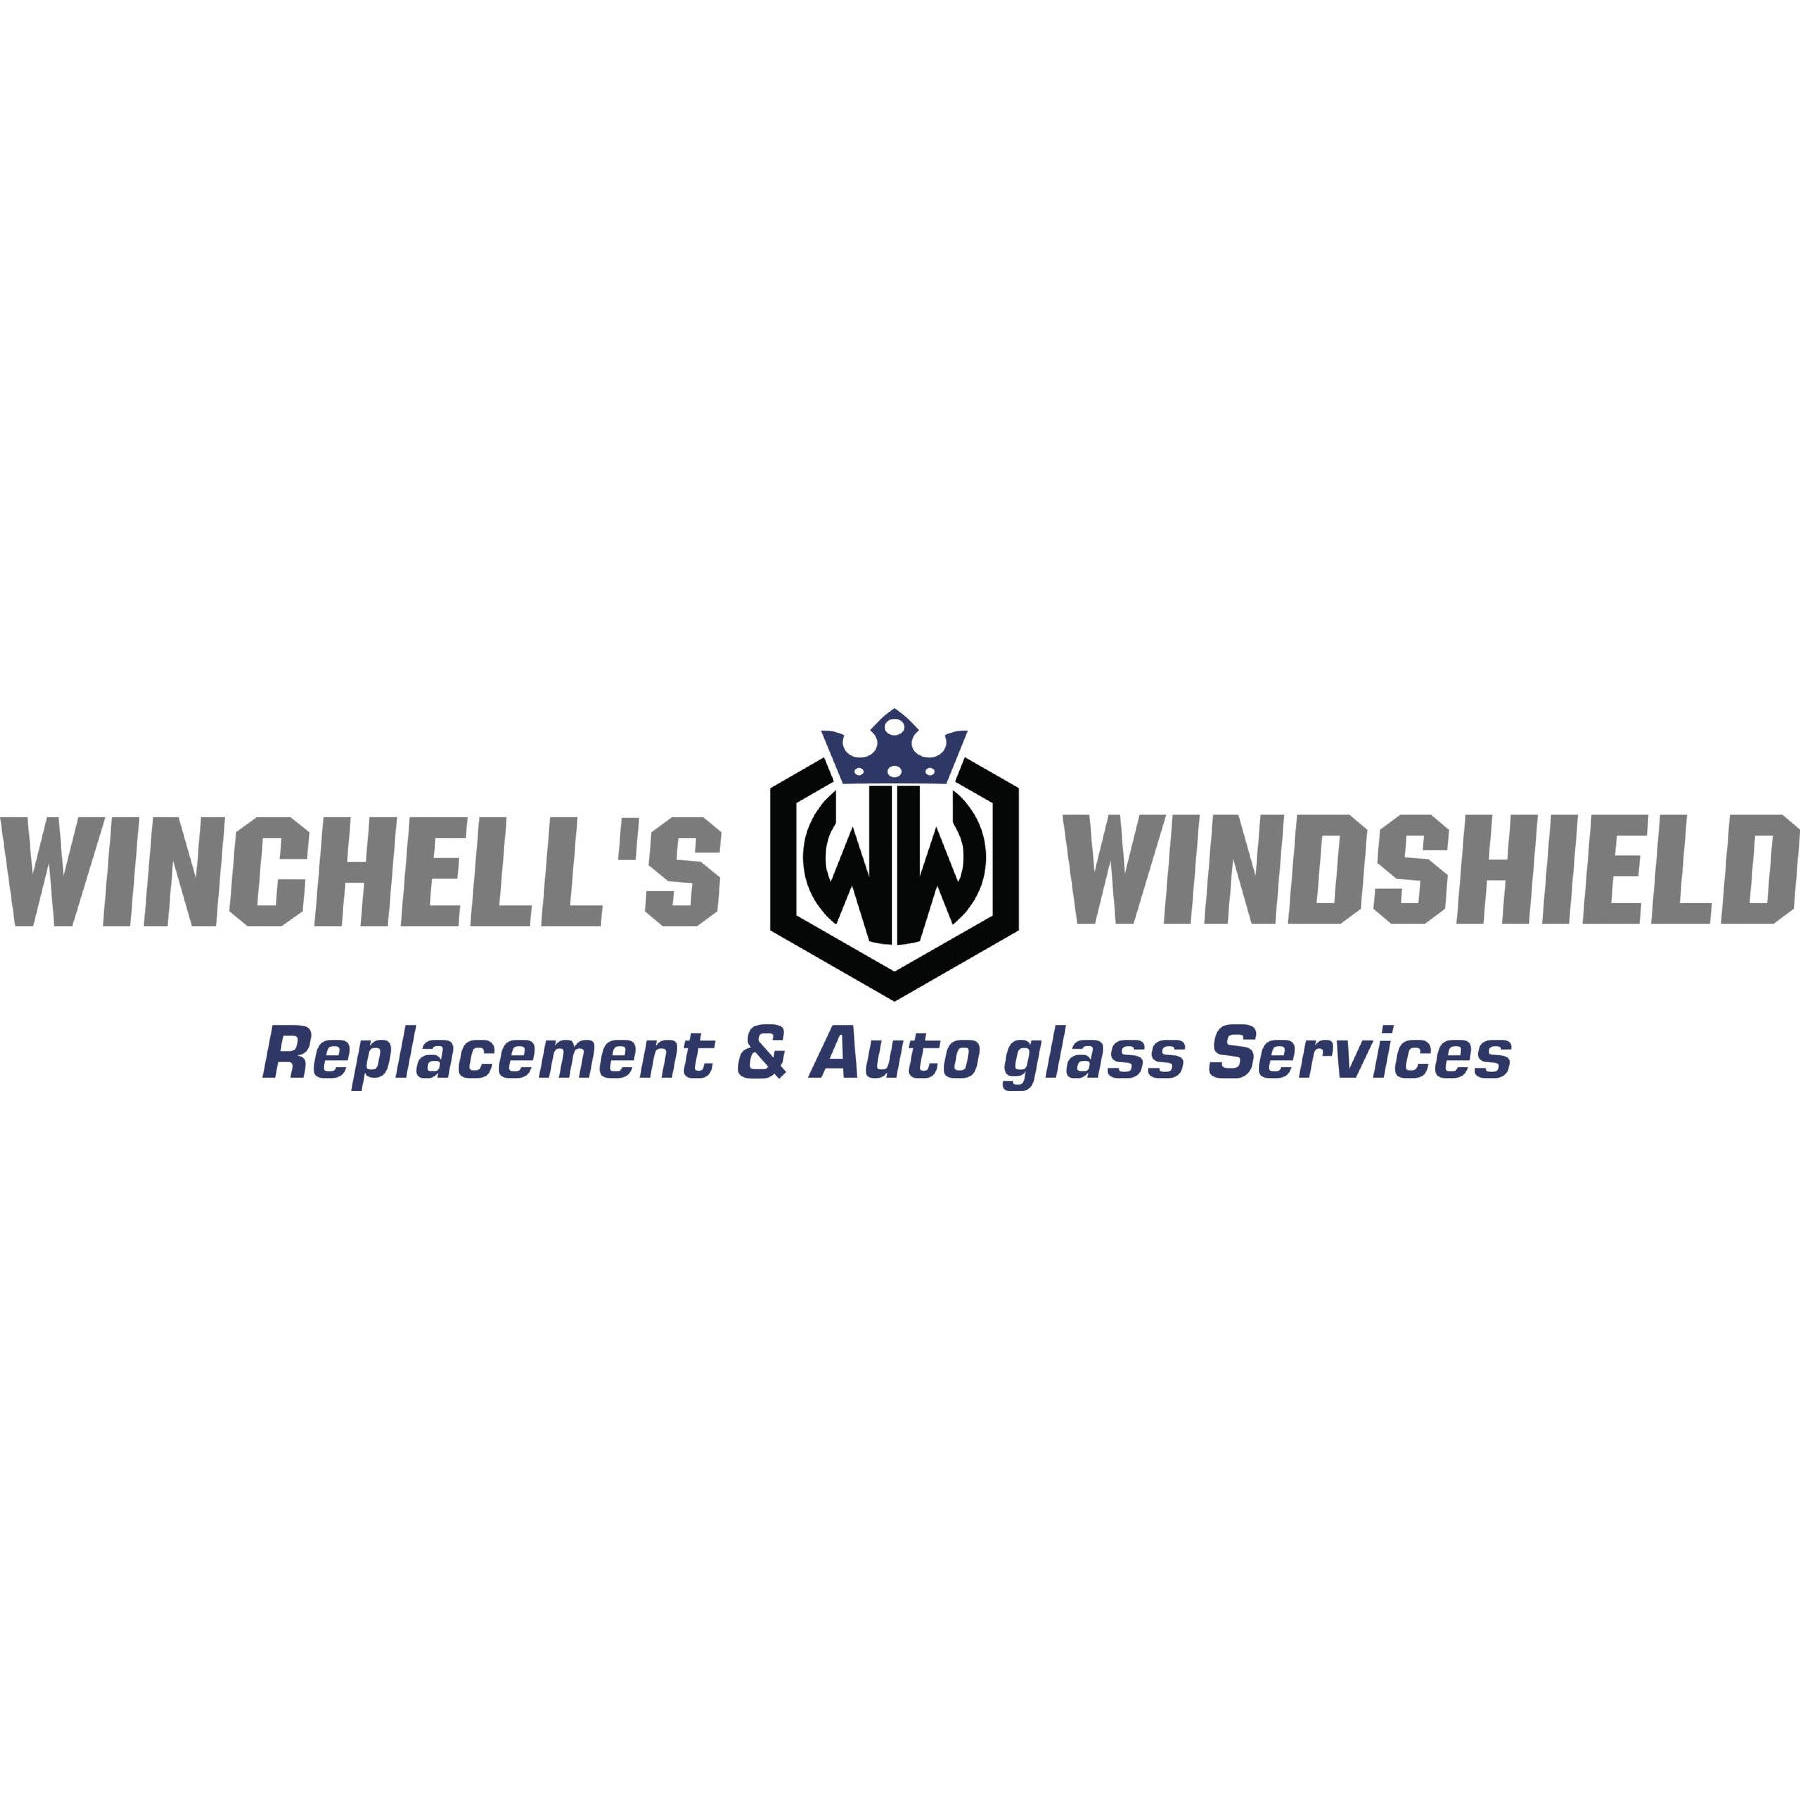 Winchell's Windshield Replacement & Auto Glass Services